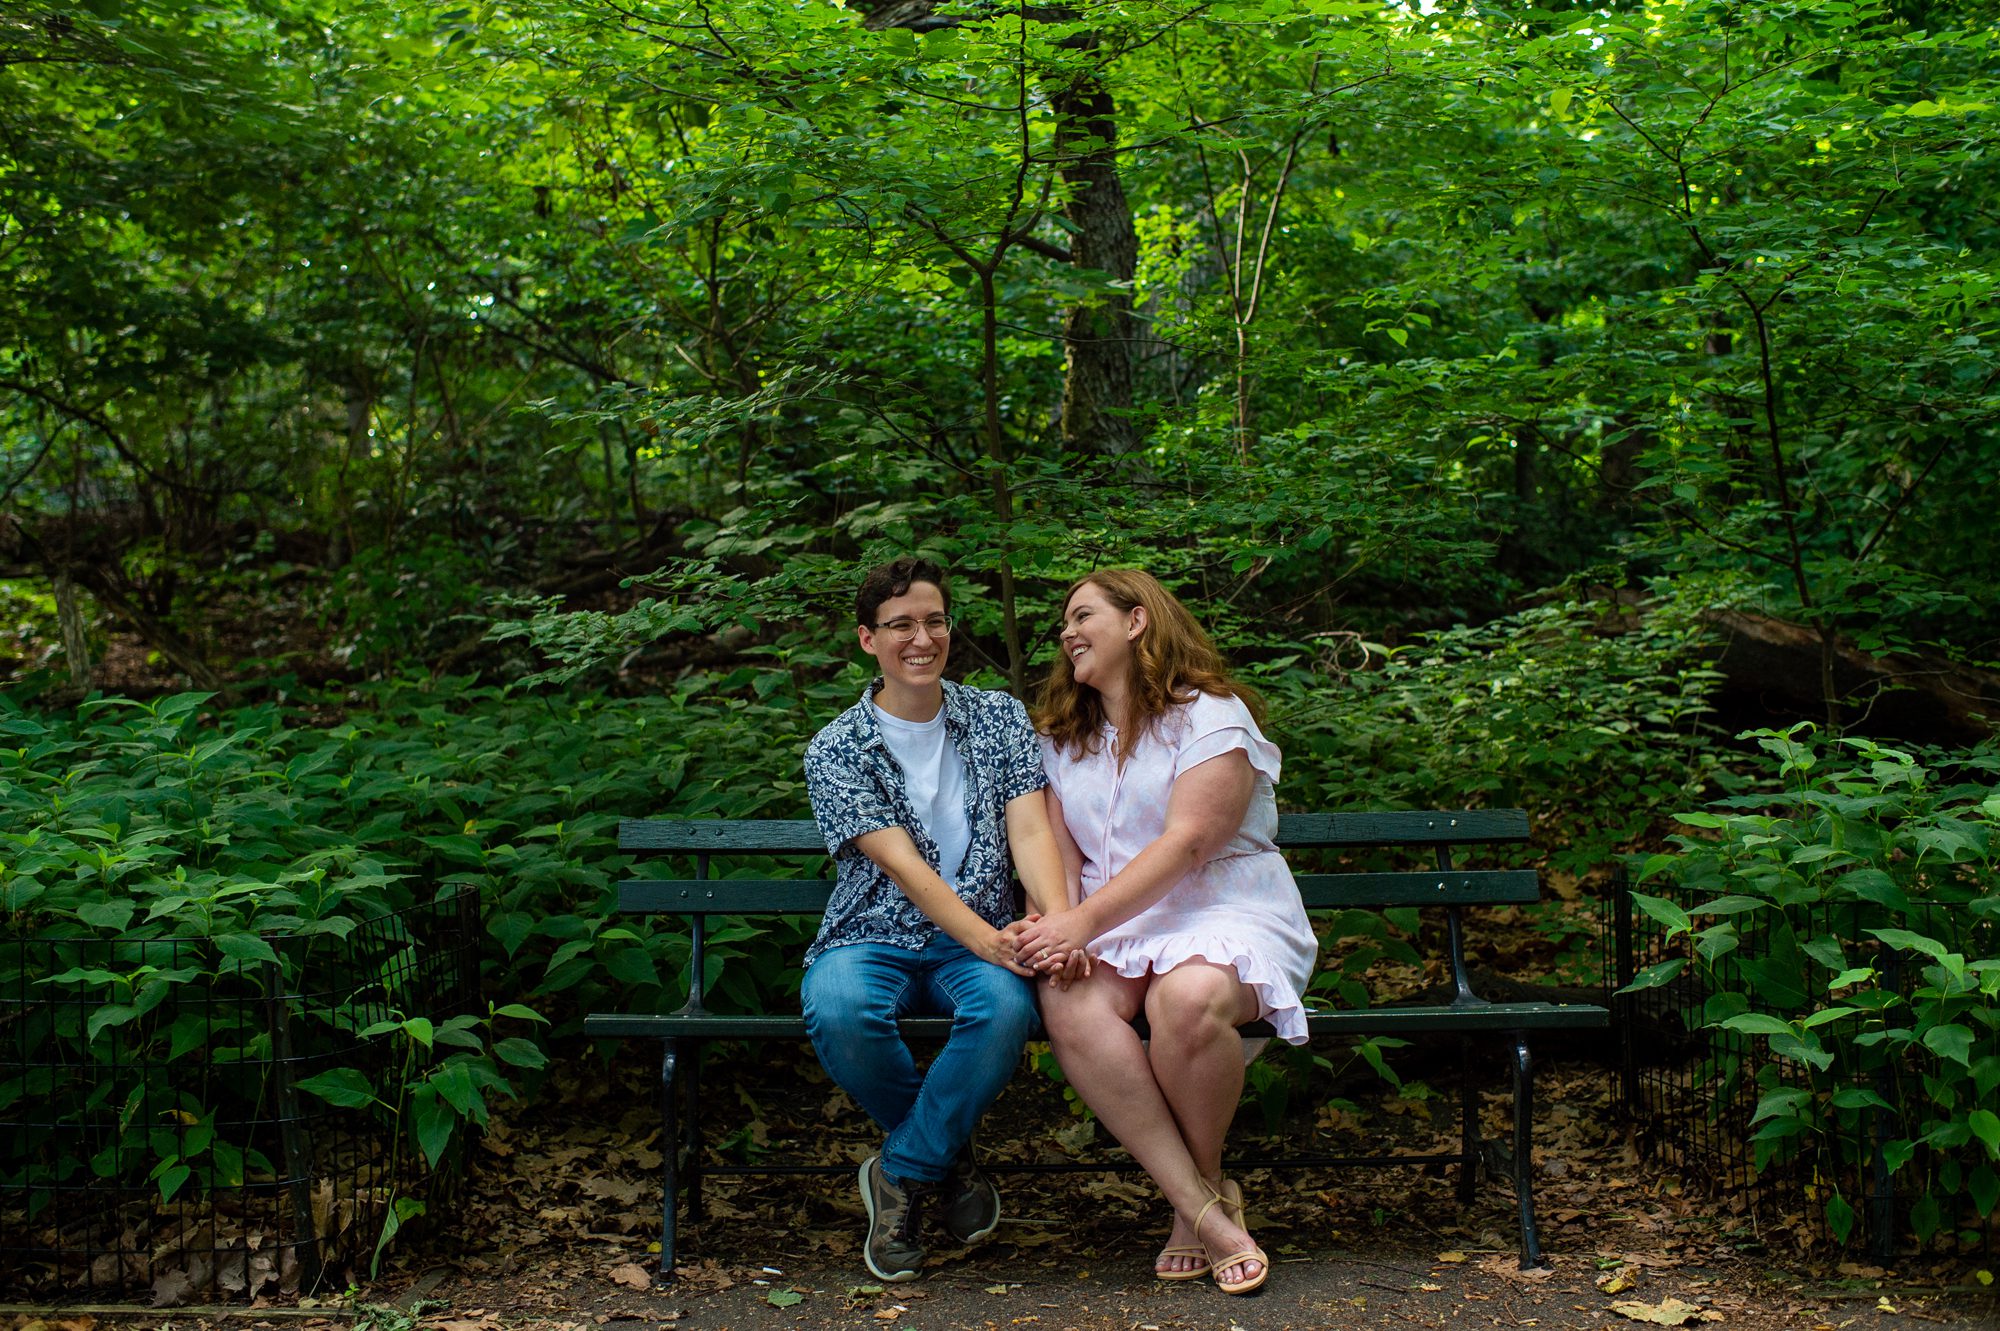 Central Park Engagement Photos in Summer